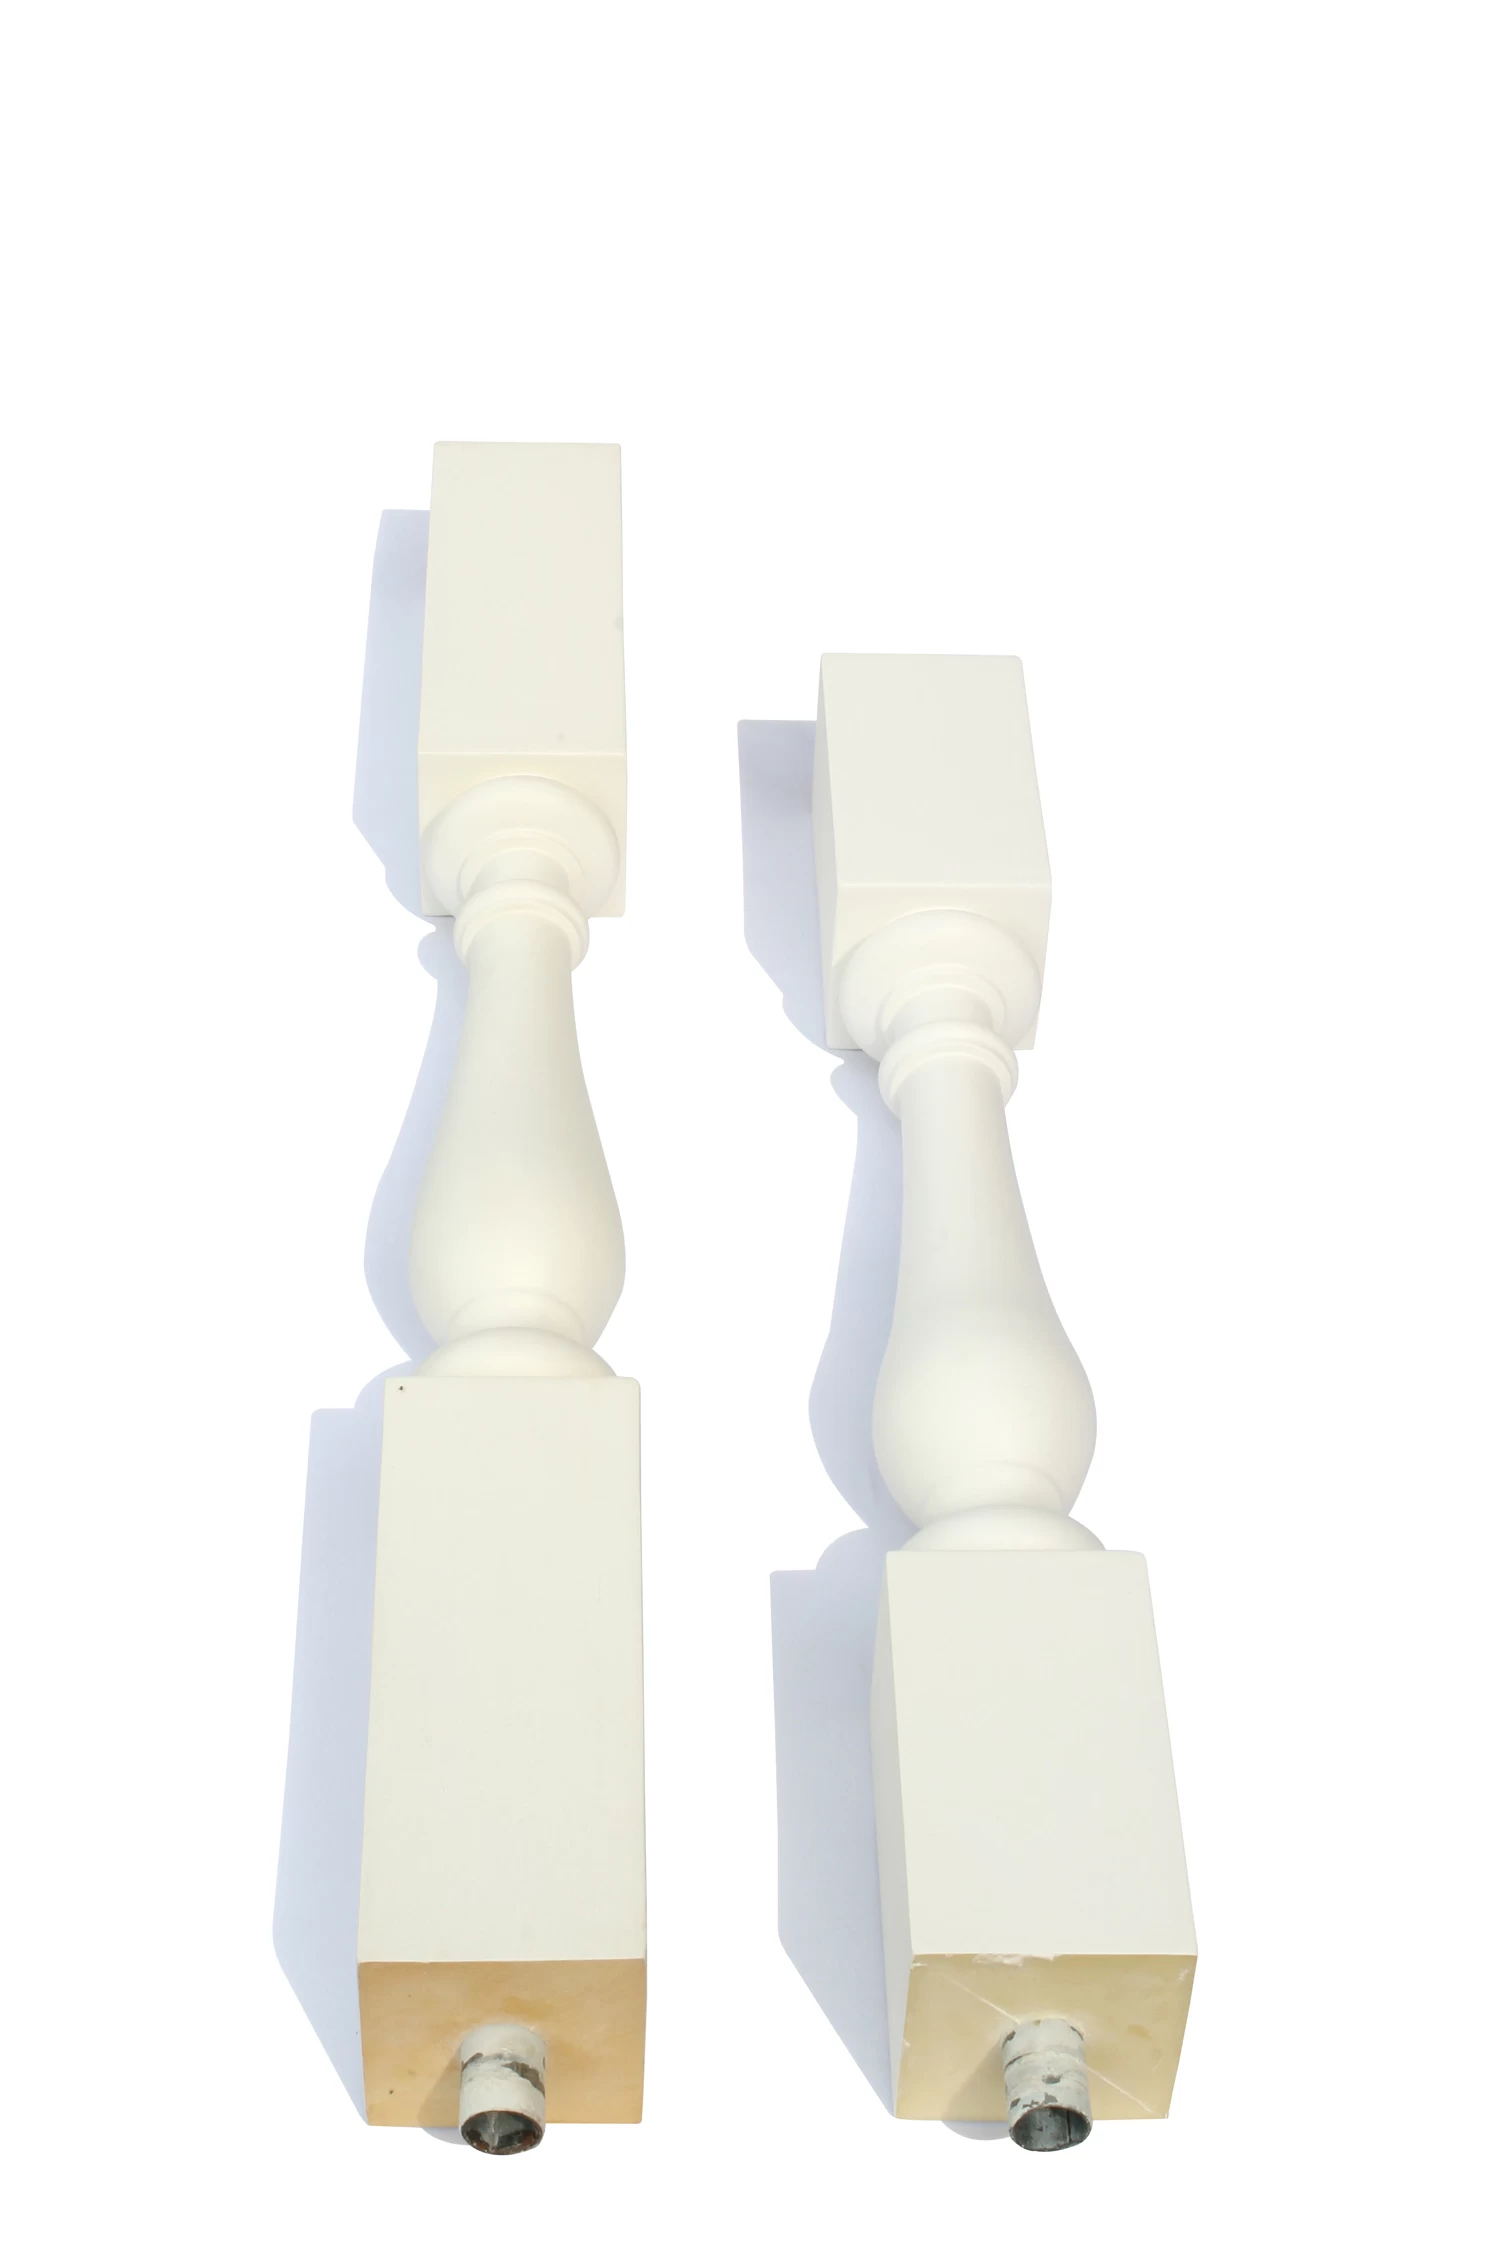 Exterior polyurethane baluster balustrade hanrail lowes for stairs